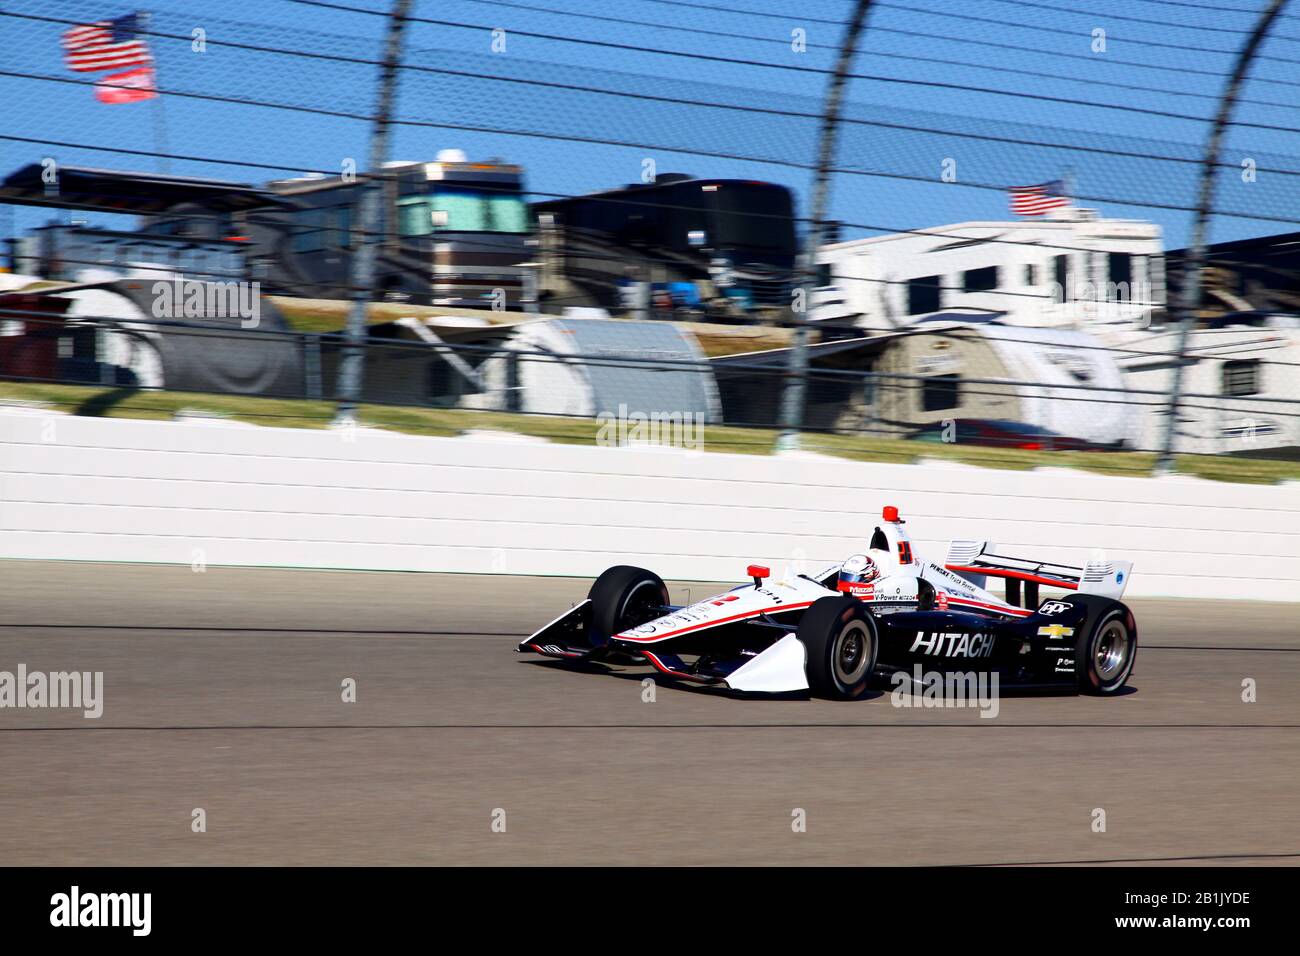 Newton Iowa, July 19, 2019: Josef Newgarden #2 driving for Team Penske, on race track during practice session for the Iowa 300 Indycar race. Stock Photo